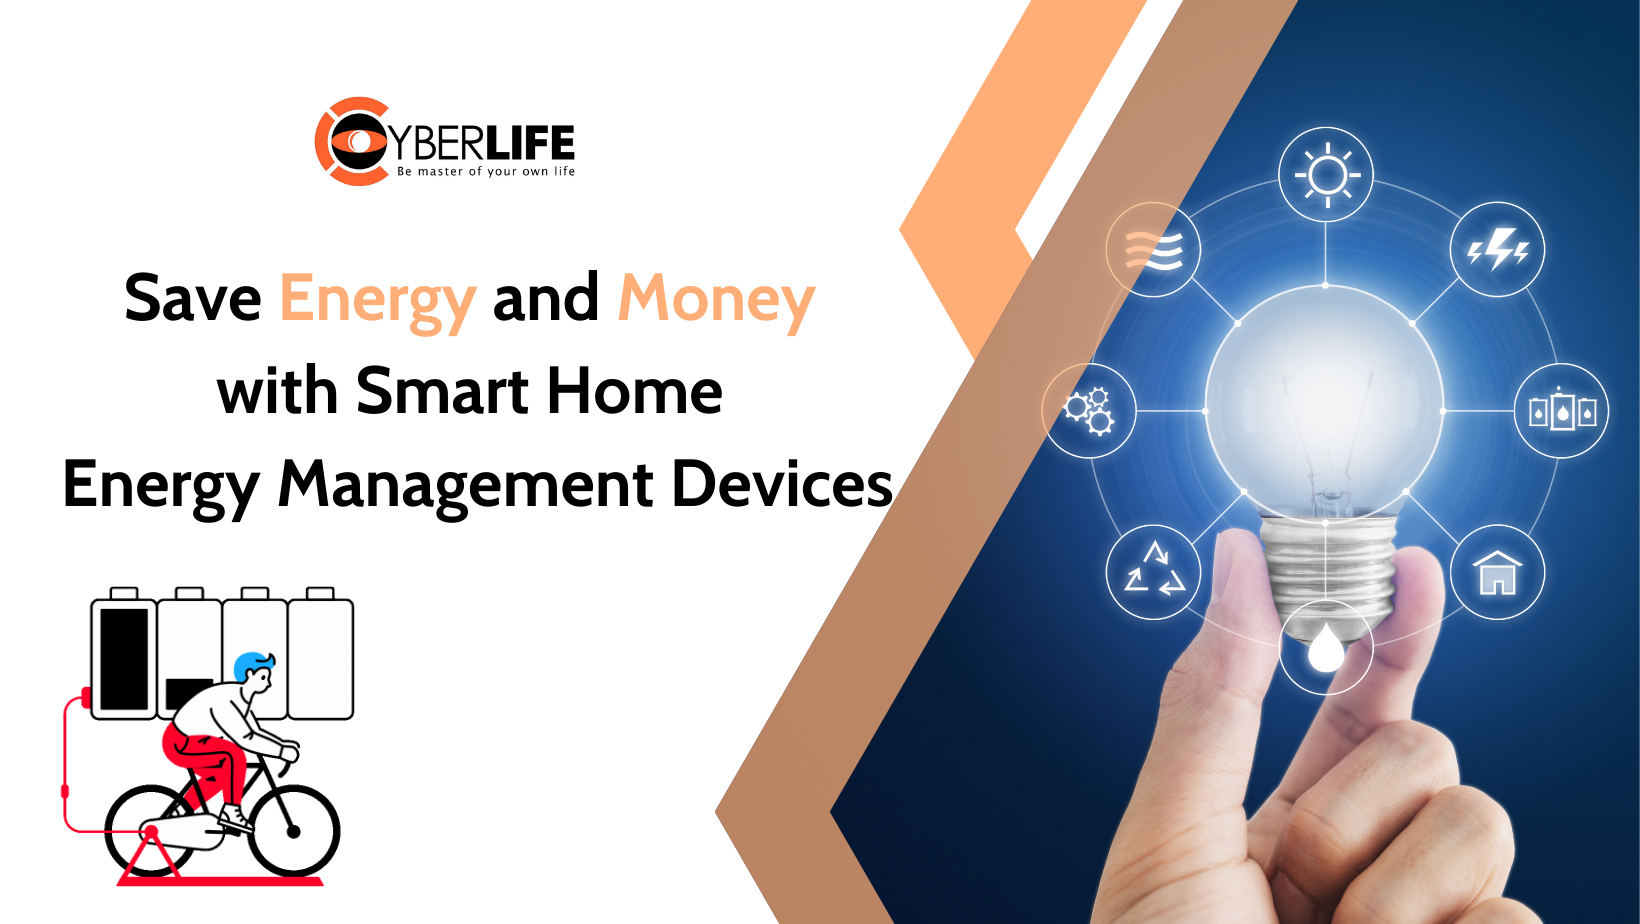 Save Energy and Money with Smart Home Energy Management Devices